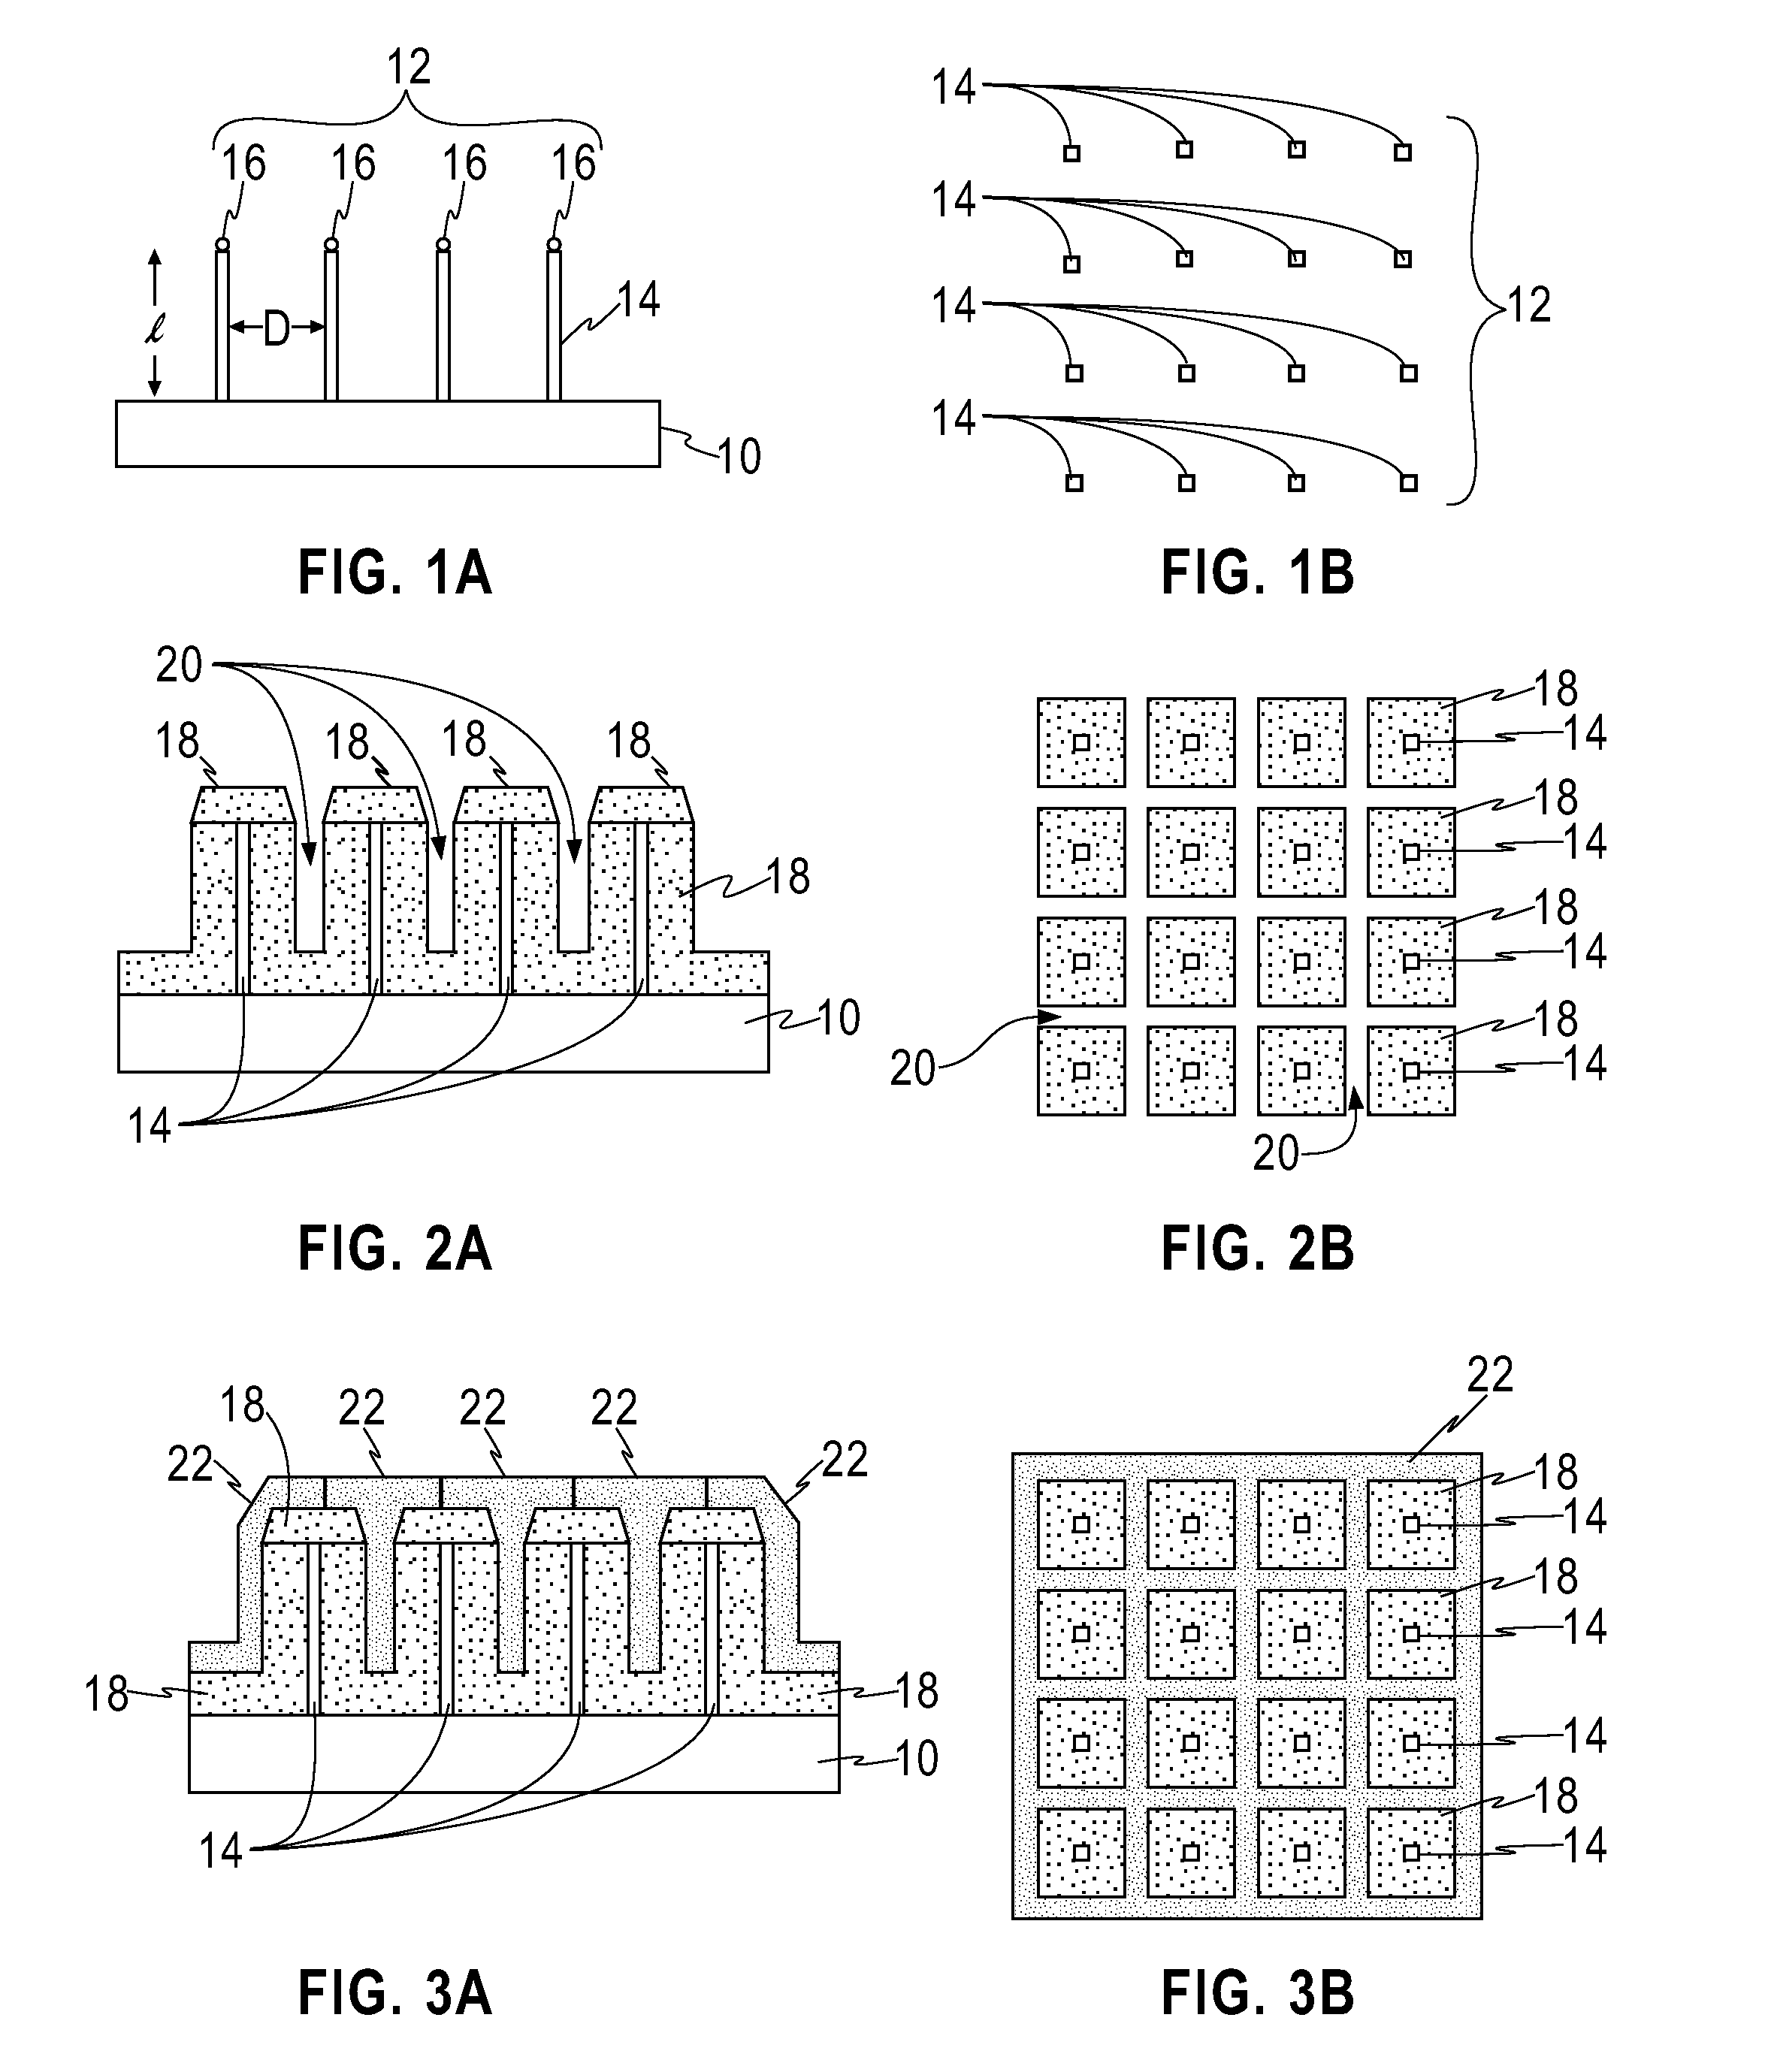 Fast p-i-n photodetector with high responsitivity